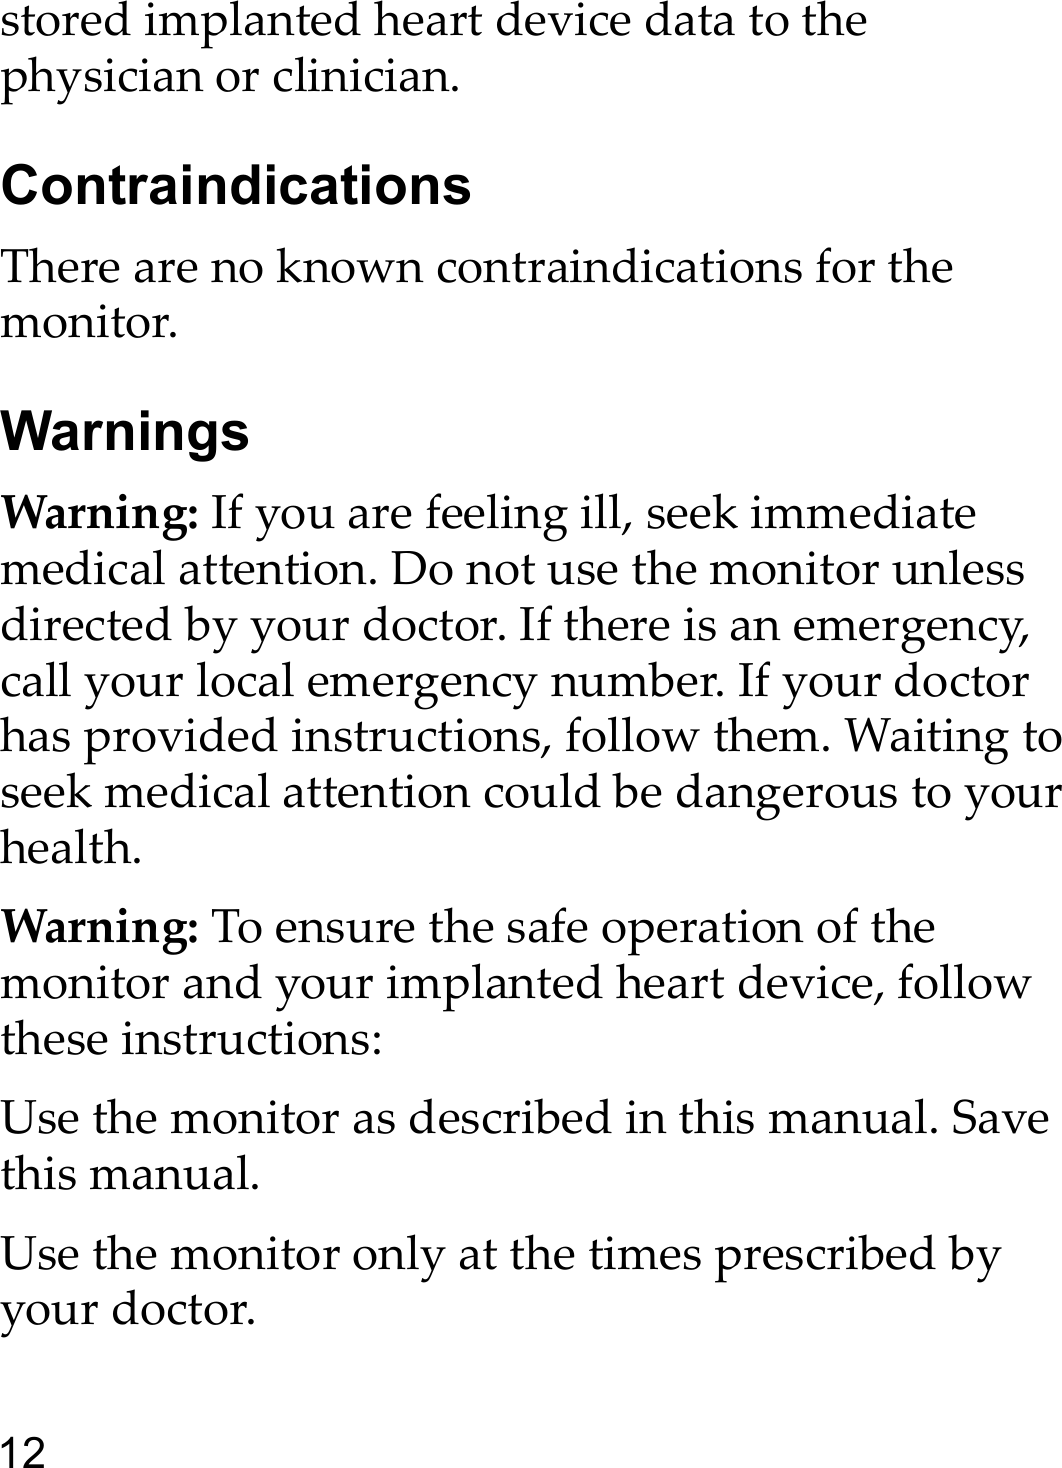 12stored implanted heart device data to the physician or clinician.ContraindicationsThere are no known contraindications for the monitor.WarningsWarning: If you are feeling ill, seek immediate medical attention. Do not use the monitor unless directed by your doctor. If there is an emergency, call your local emergency number. If your doctor has provided instructions, follow them. Waiting to seek medical attention could be dangerous to your health.Warning: To ensure the safe operation of the monitor and your implanted heart device, follow these instructions:Use the monitor as described in this manual. Save this manual.Use the monitor only at the times prescribed by your doctor.